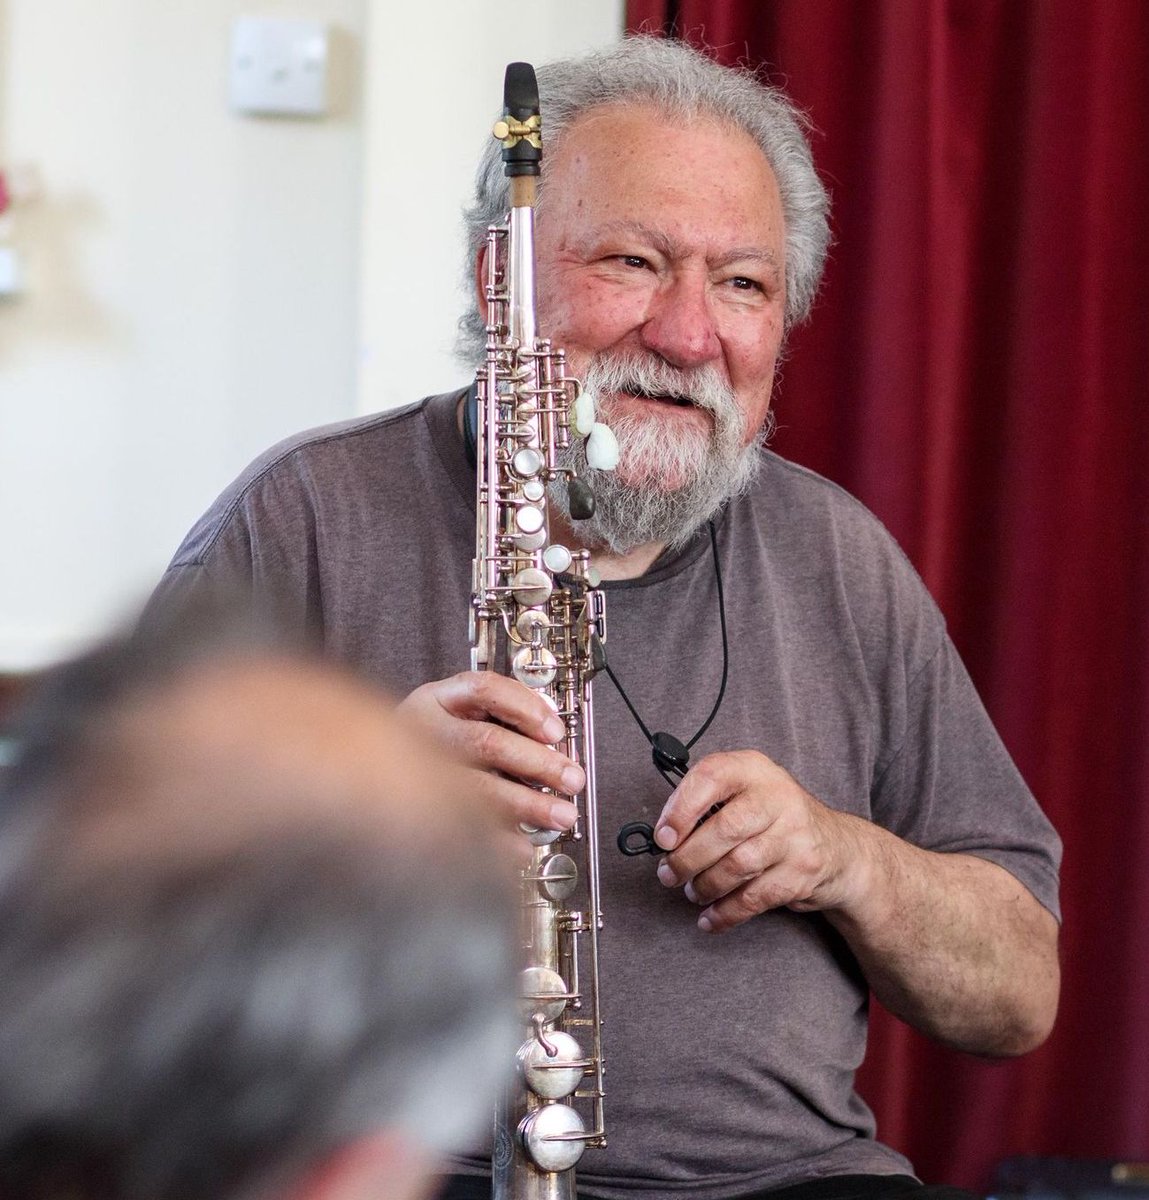 Many happy returns to Evan Parker, 80 today.  Looking forward to the coming weekend of concerts at @Cafeoto.